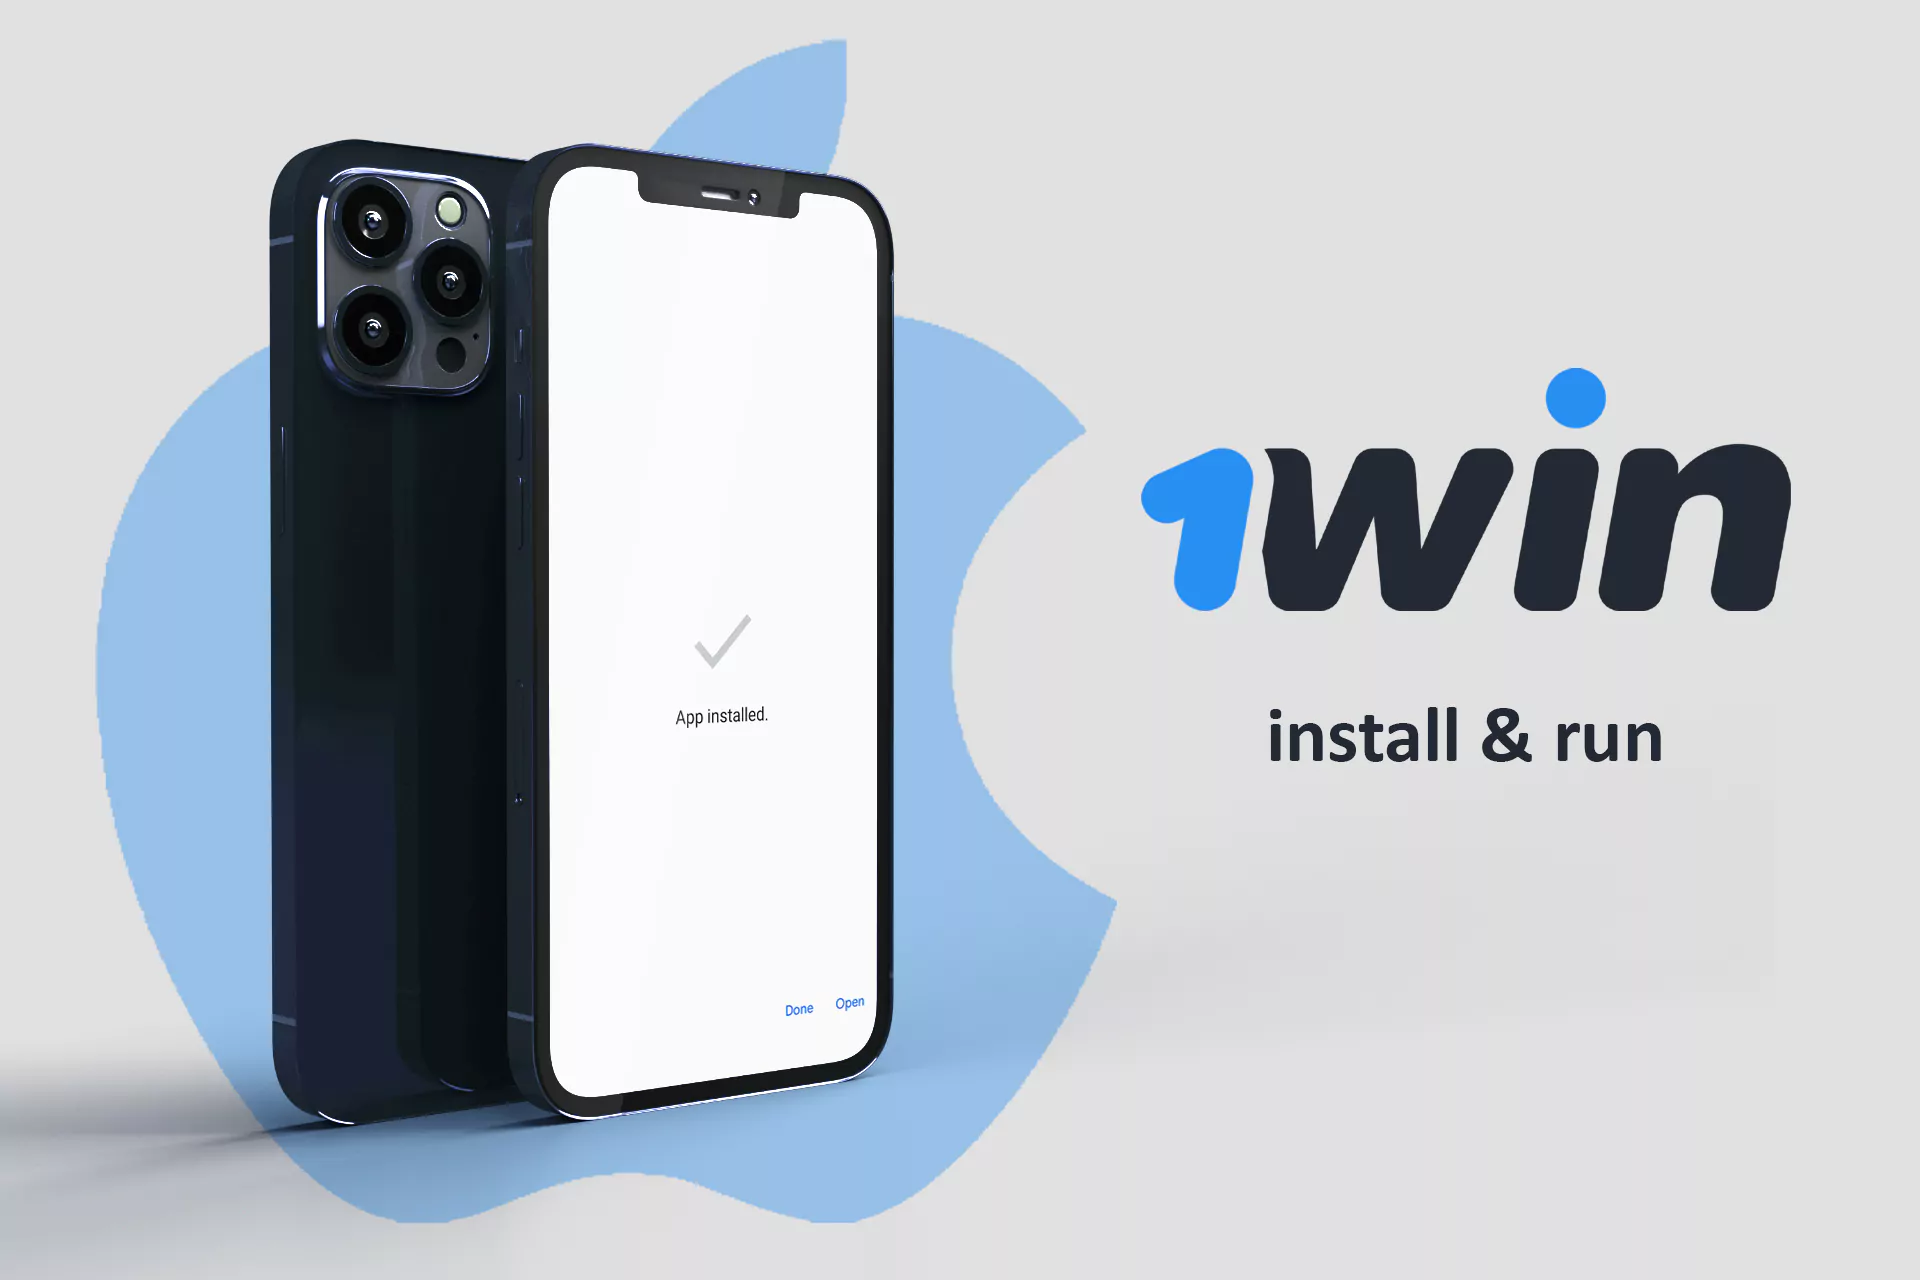 Install the 1win app and run it.